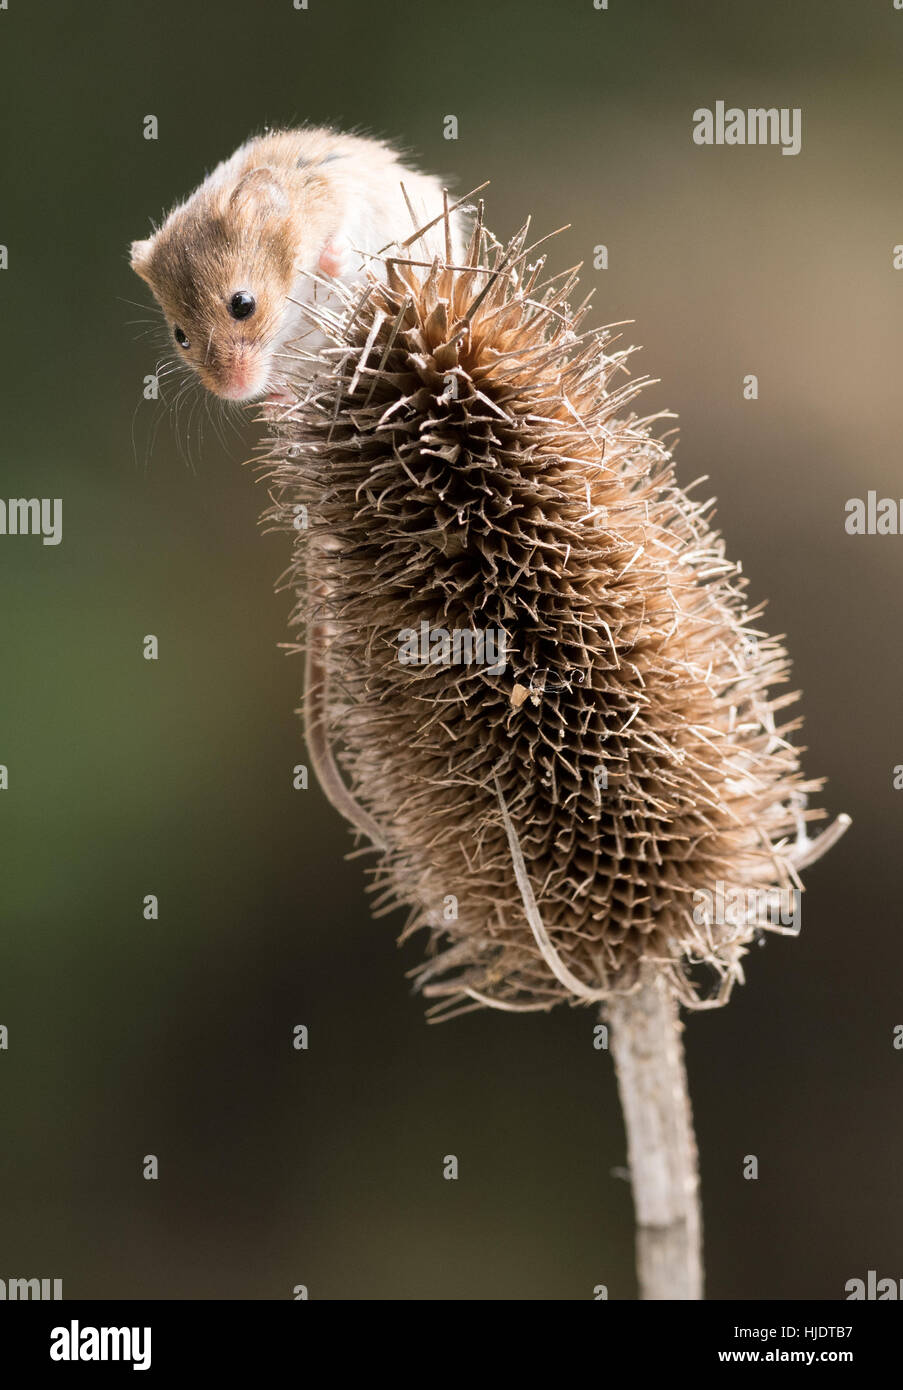 Harvest Mouse on Teasel Stock Photo